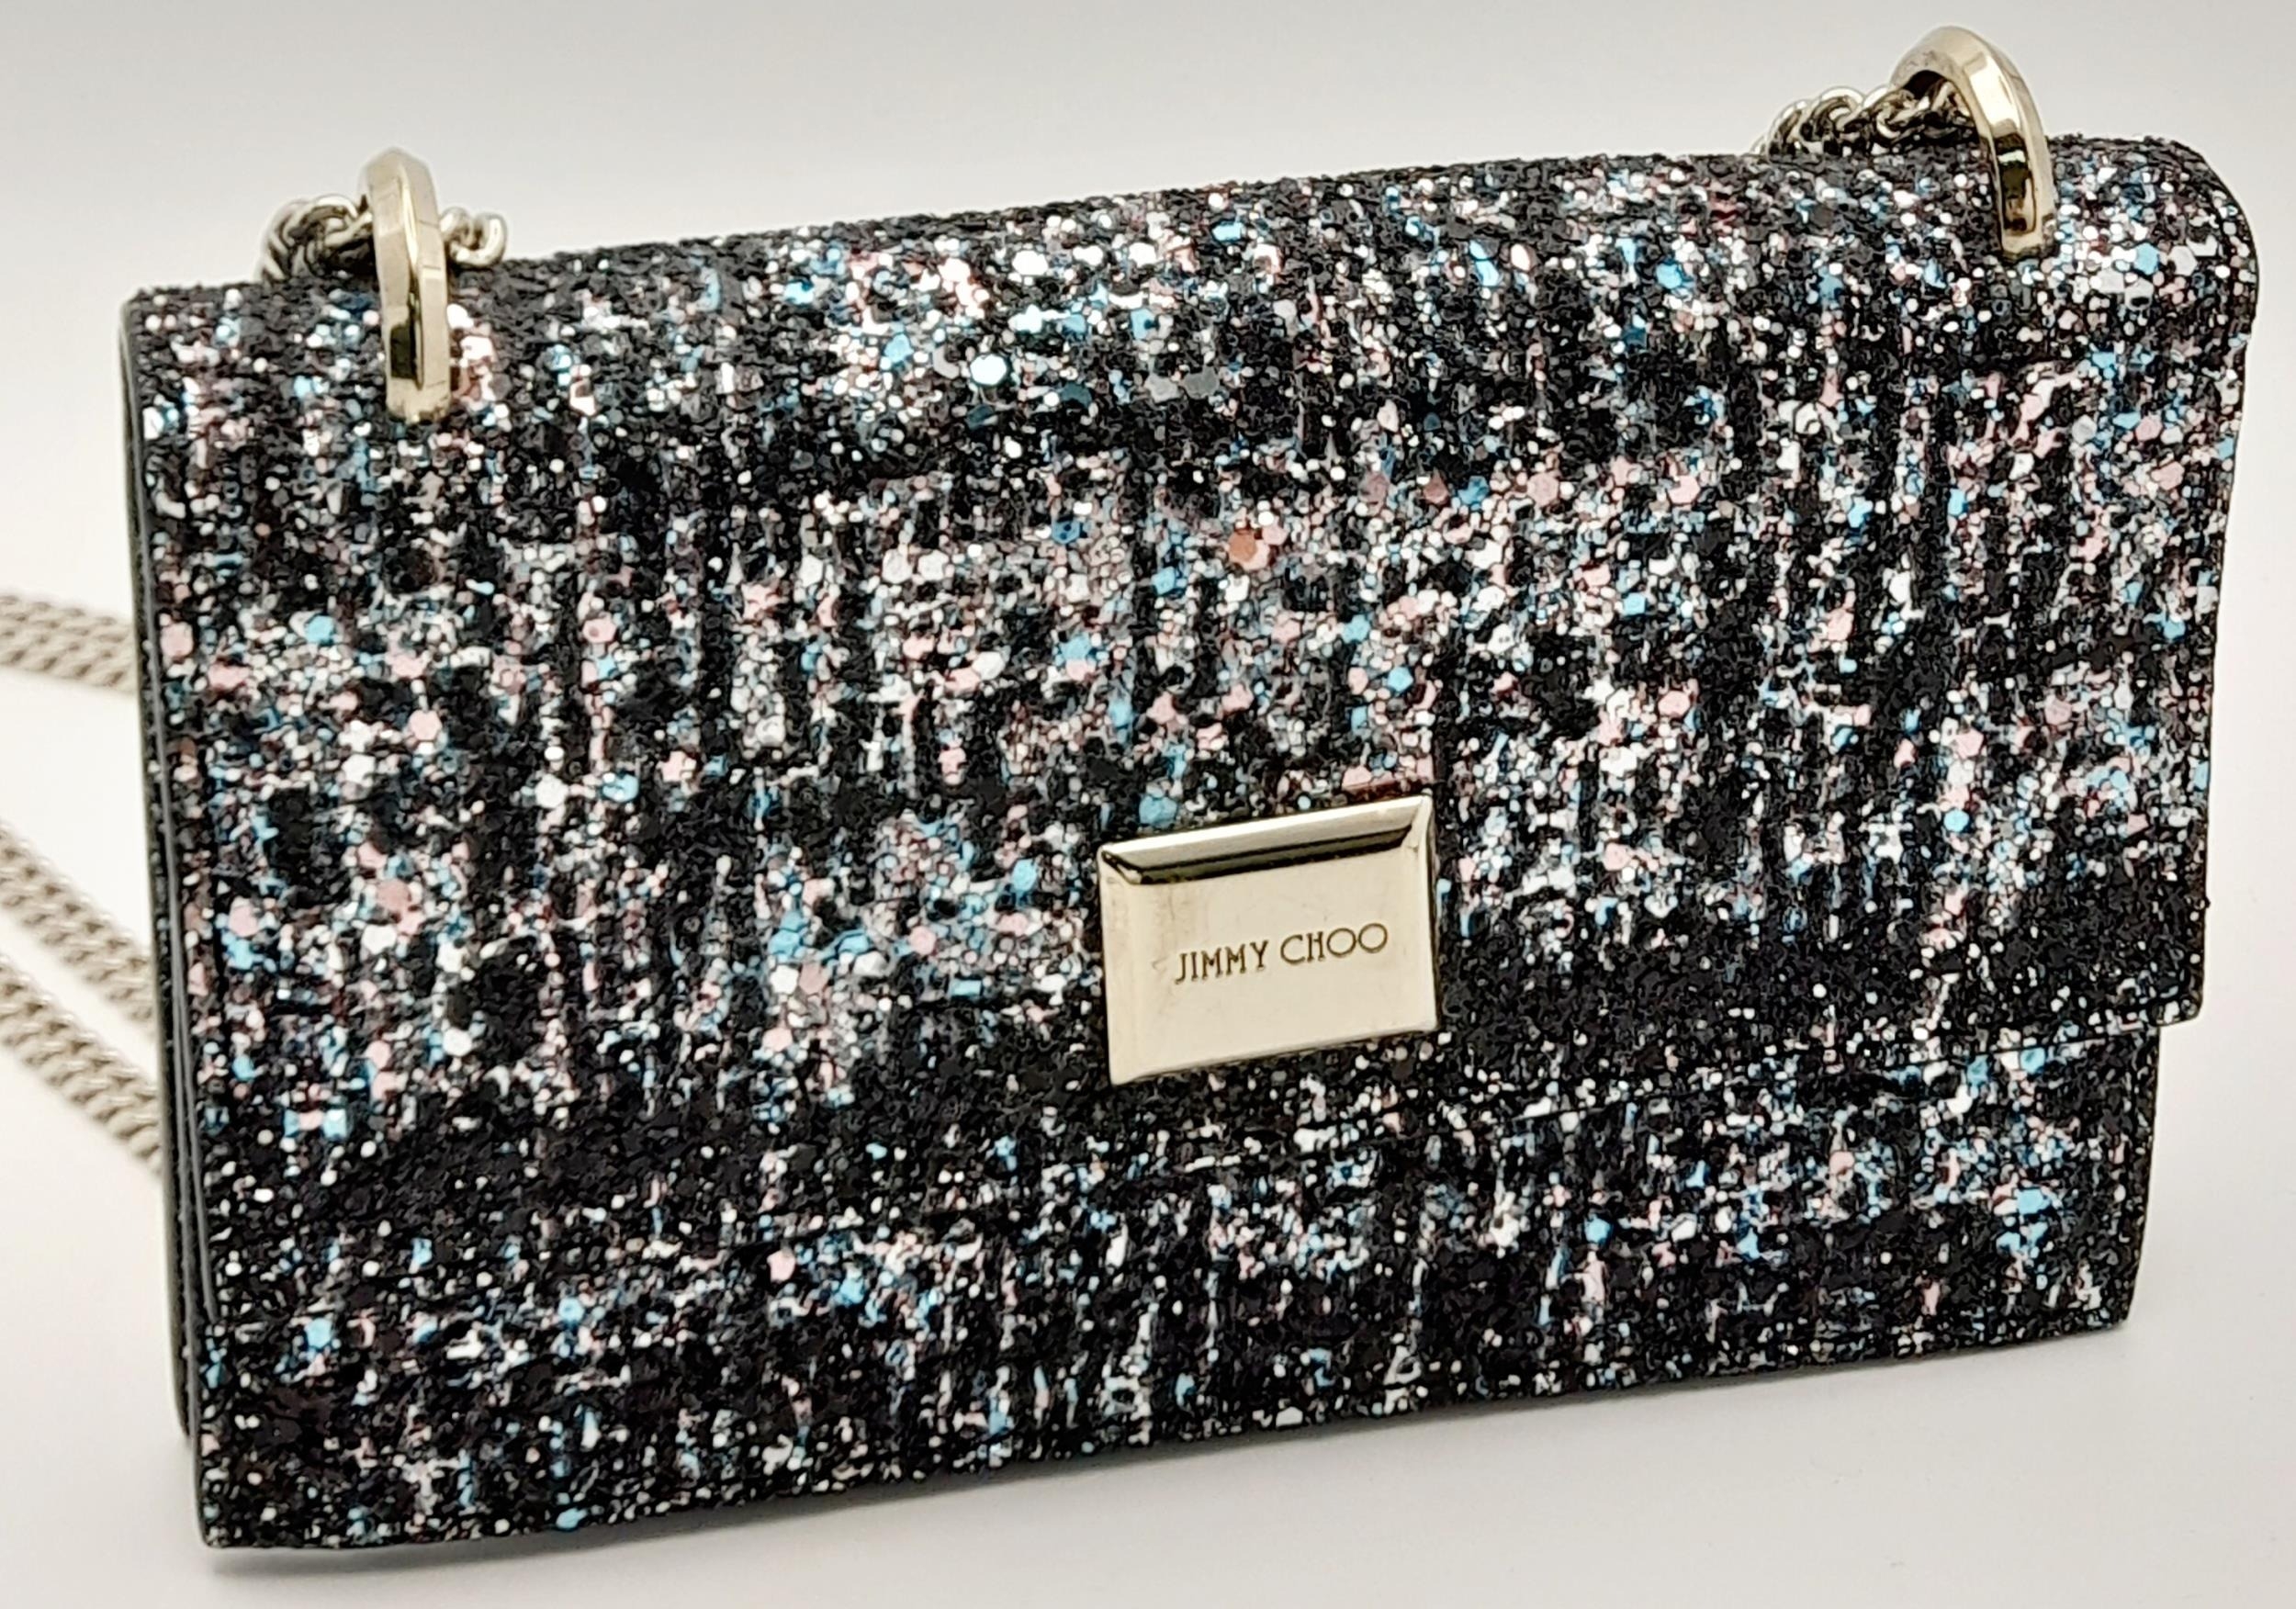 A Jimmy Choo 'Leni' Glitter Crossbody Bag. Black leather and blue, pink and black glitter exterior - Image 2 of 9